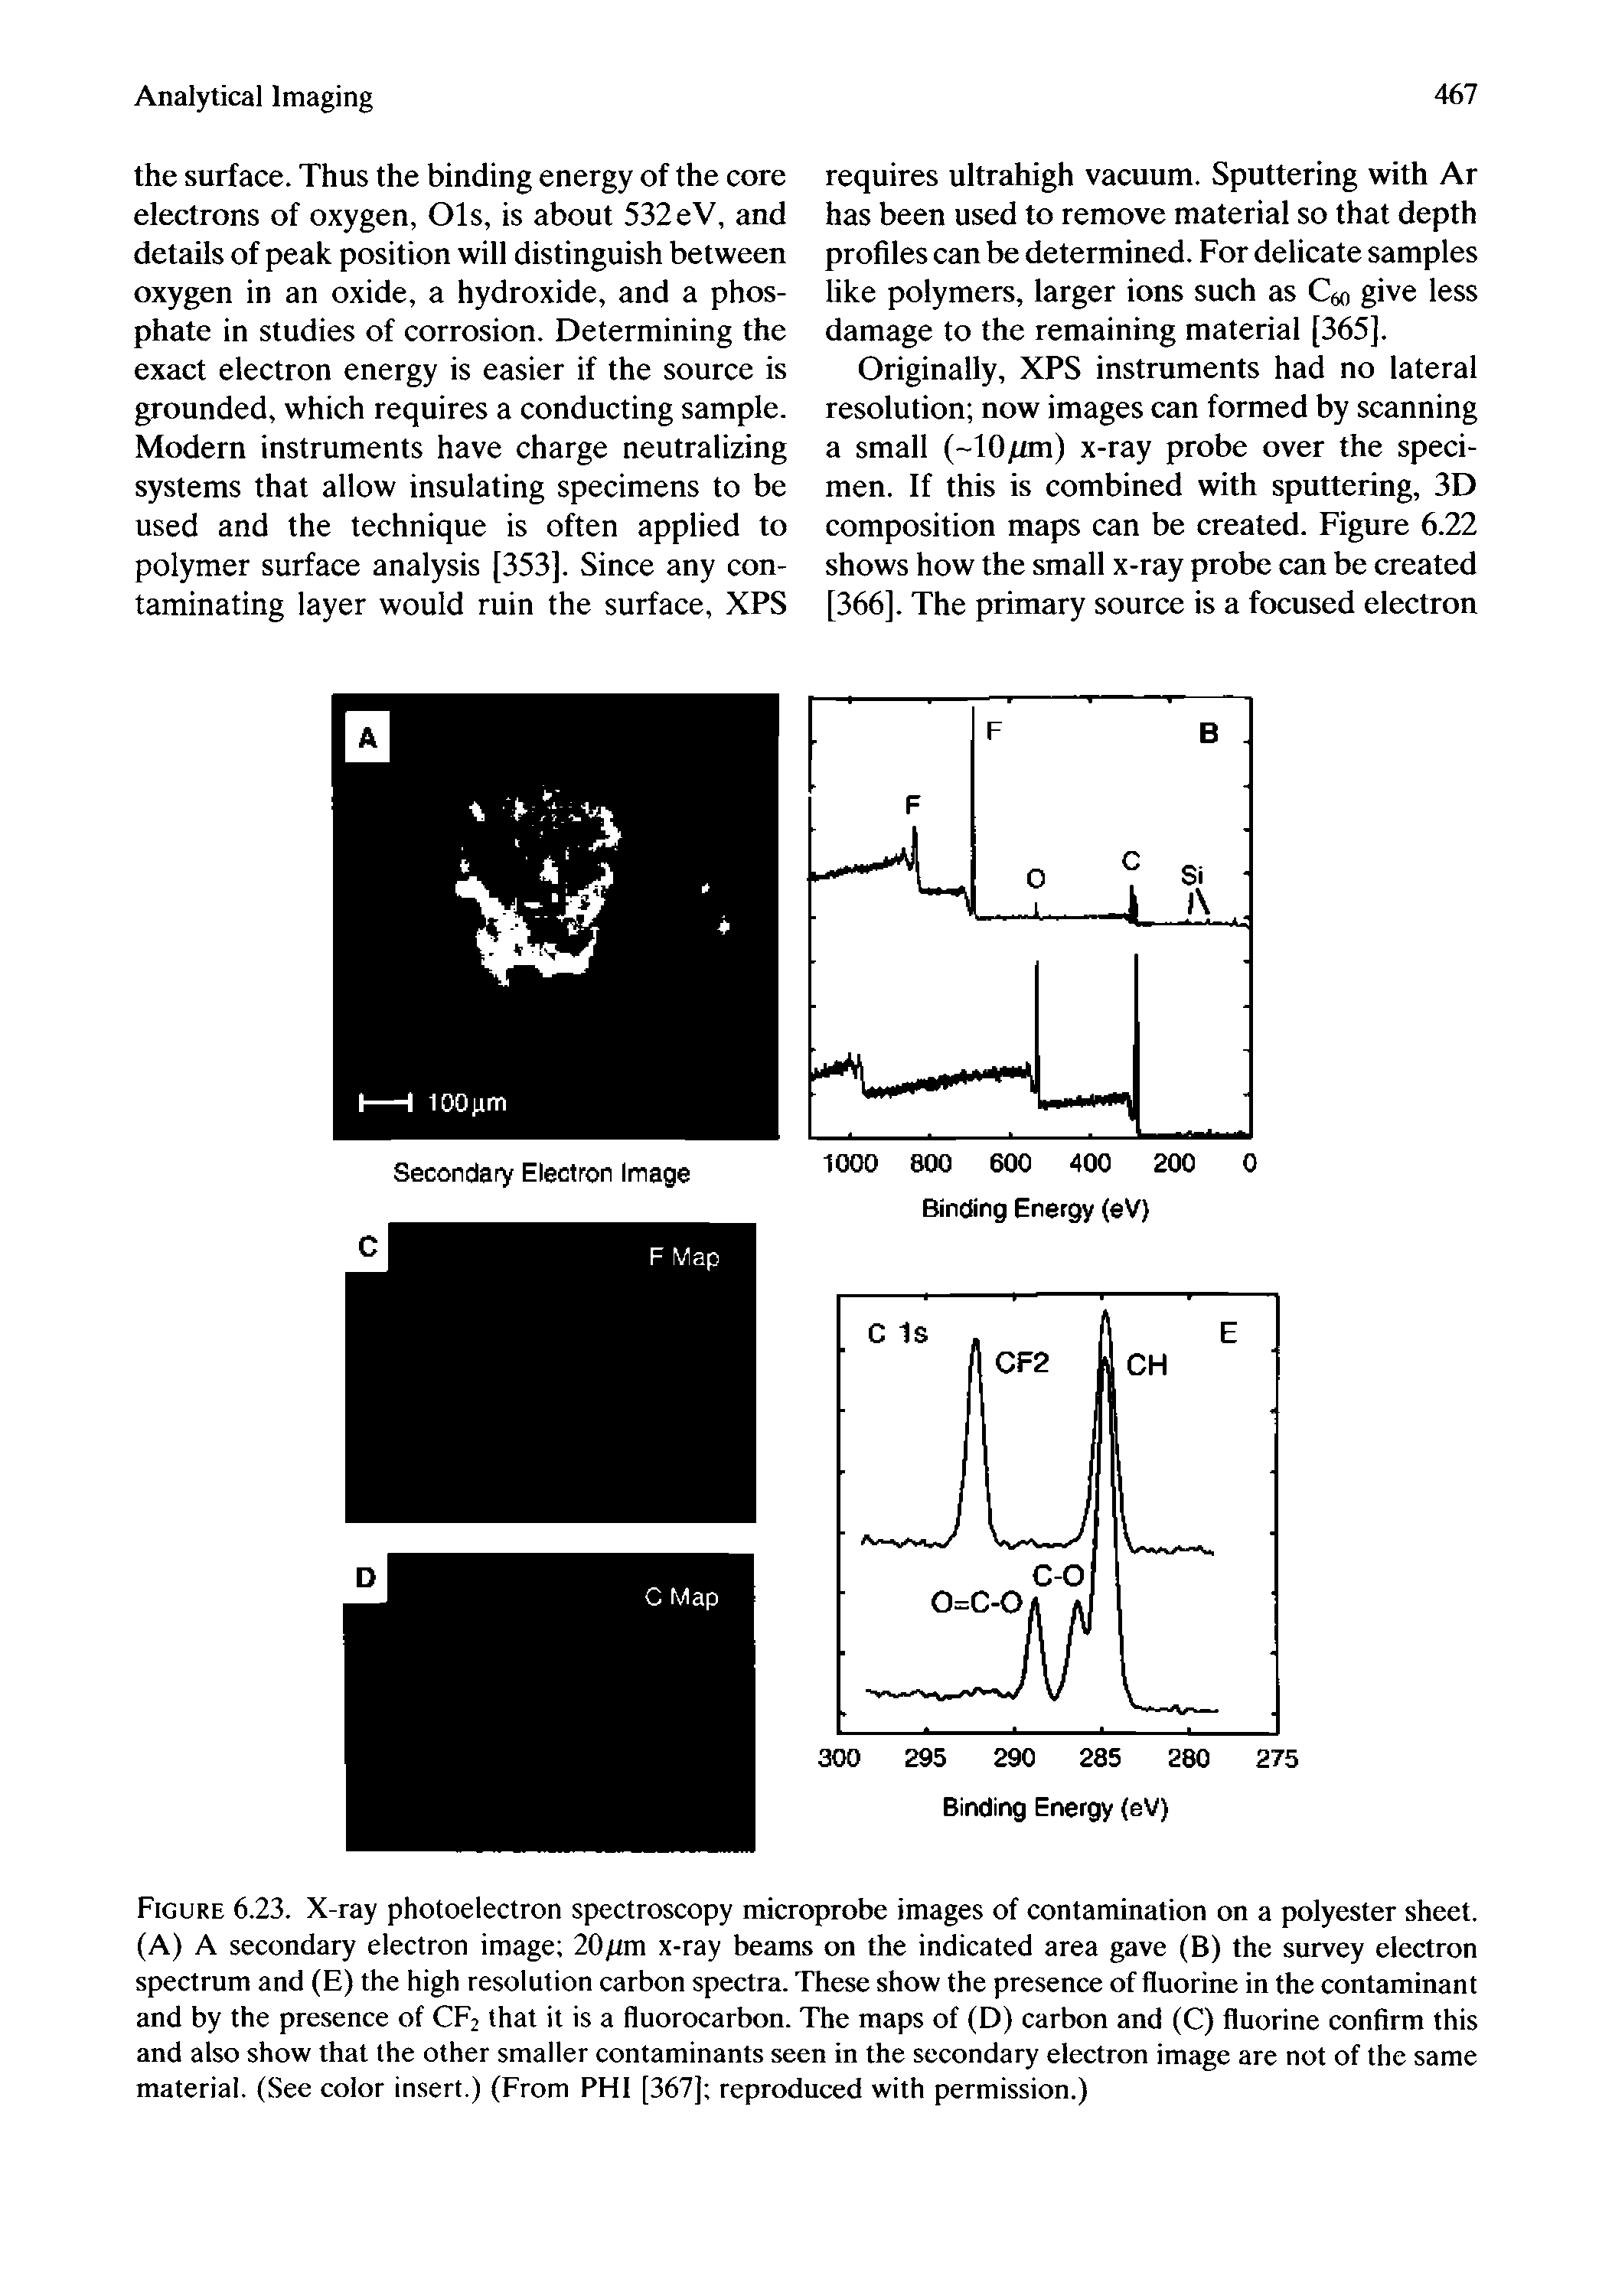 Figure 6.23. X-ray photoelectron spectroscopy microprobe images of contamination on a polyester sheet. (A) A secondary electron image 20/xm x-ray beams on the indicated area gave (B) the survey electron spectrum and (E) the high resolution carbon spectra. These show the presence of fluorine in the contaminant and by the presence of CF2 that it is a fluorocarbon. The maps of (D) carbon and (C) fluorine confirm this and also show that the other smaller contaminants seen in the secondary electron image are not of the same material. (See color insert.) (From PHI [367] reproduced with permission.)...